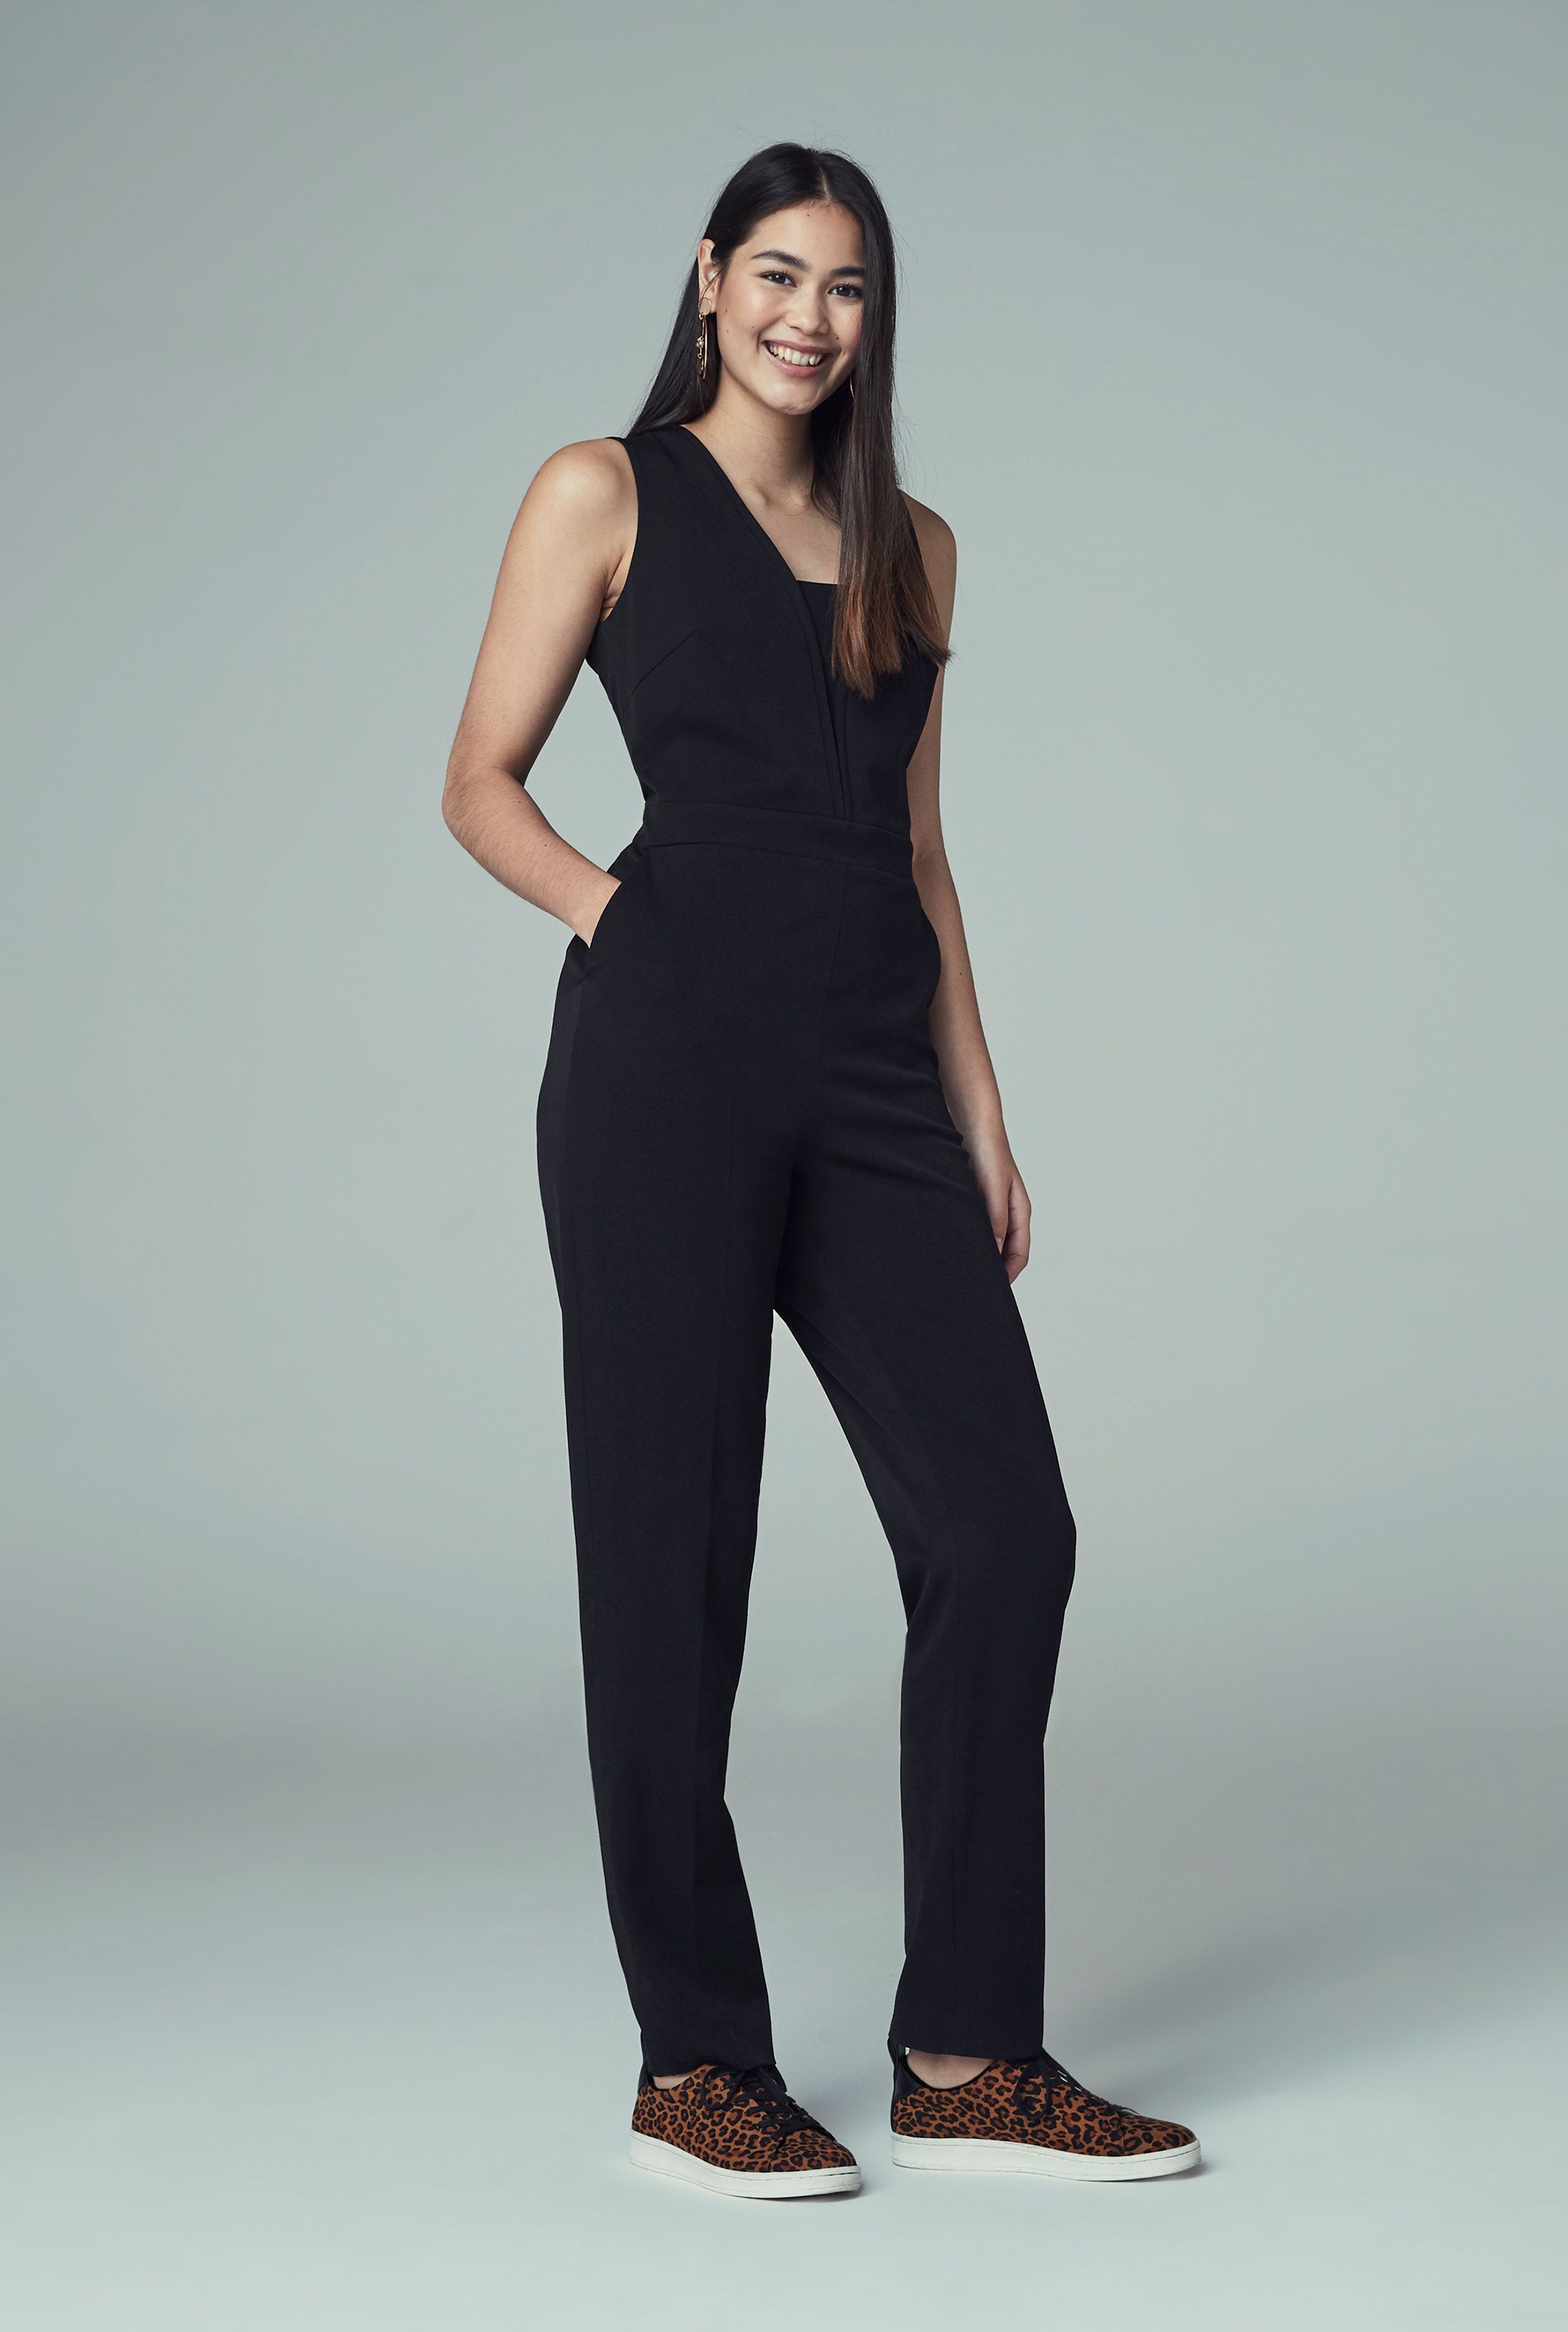 Sleeveless Knit Jumpsuit for Women Natural Life Overalls Baggy Wide Leg Loose Rompers Jumpsuit